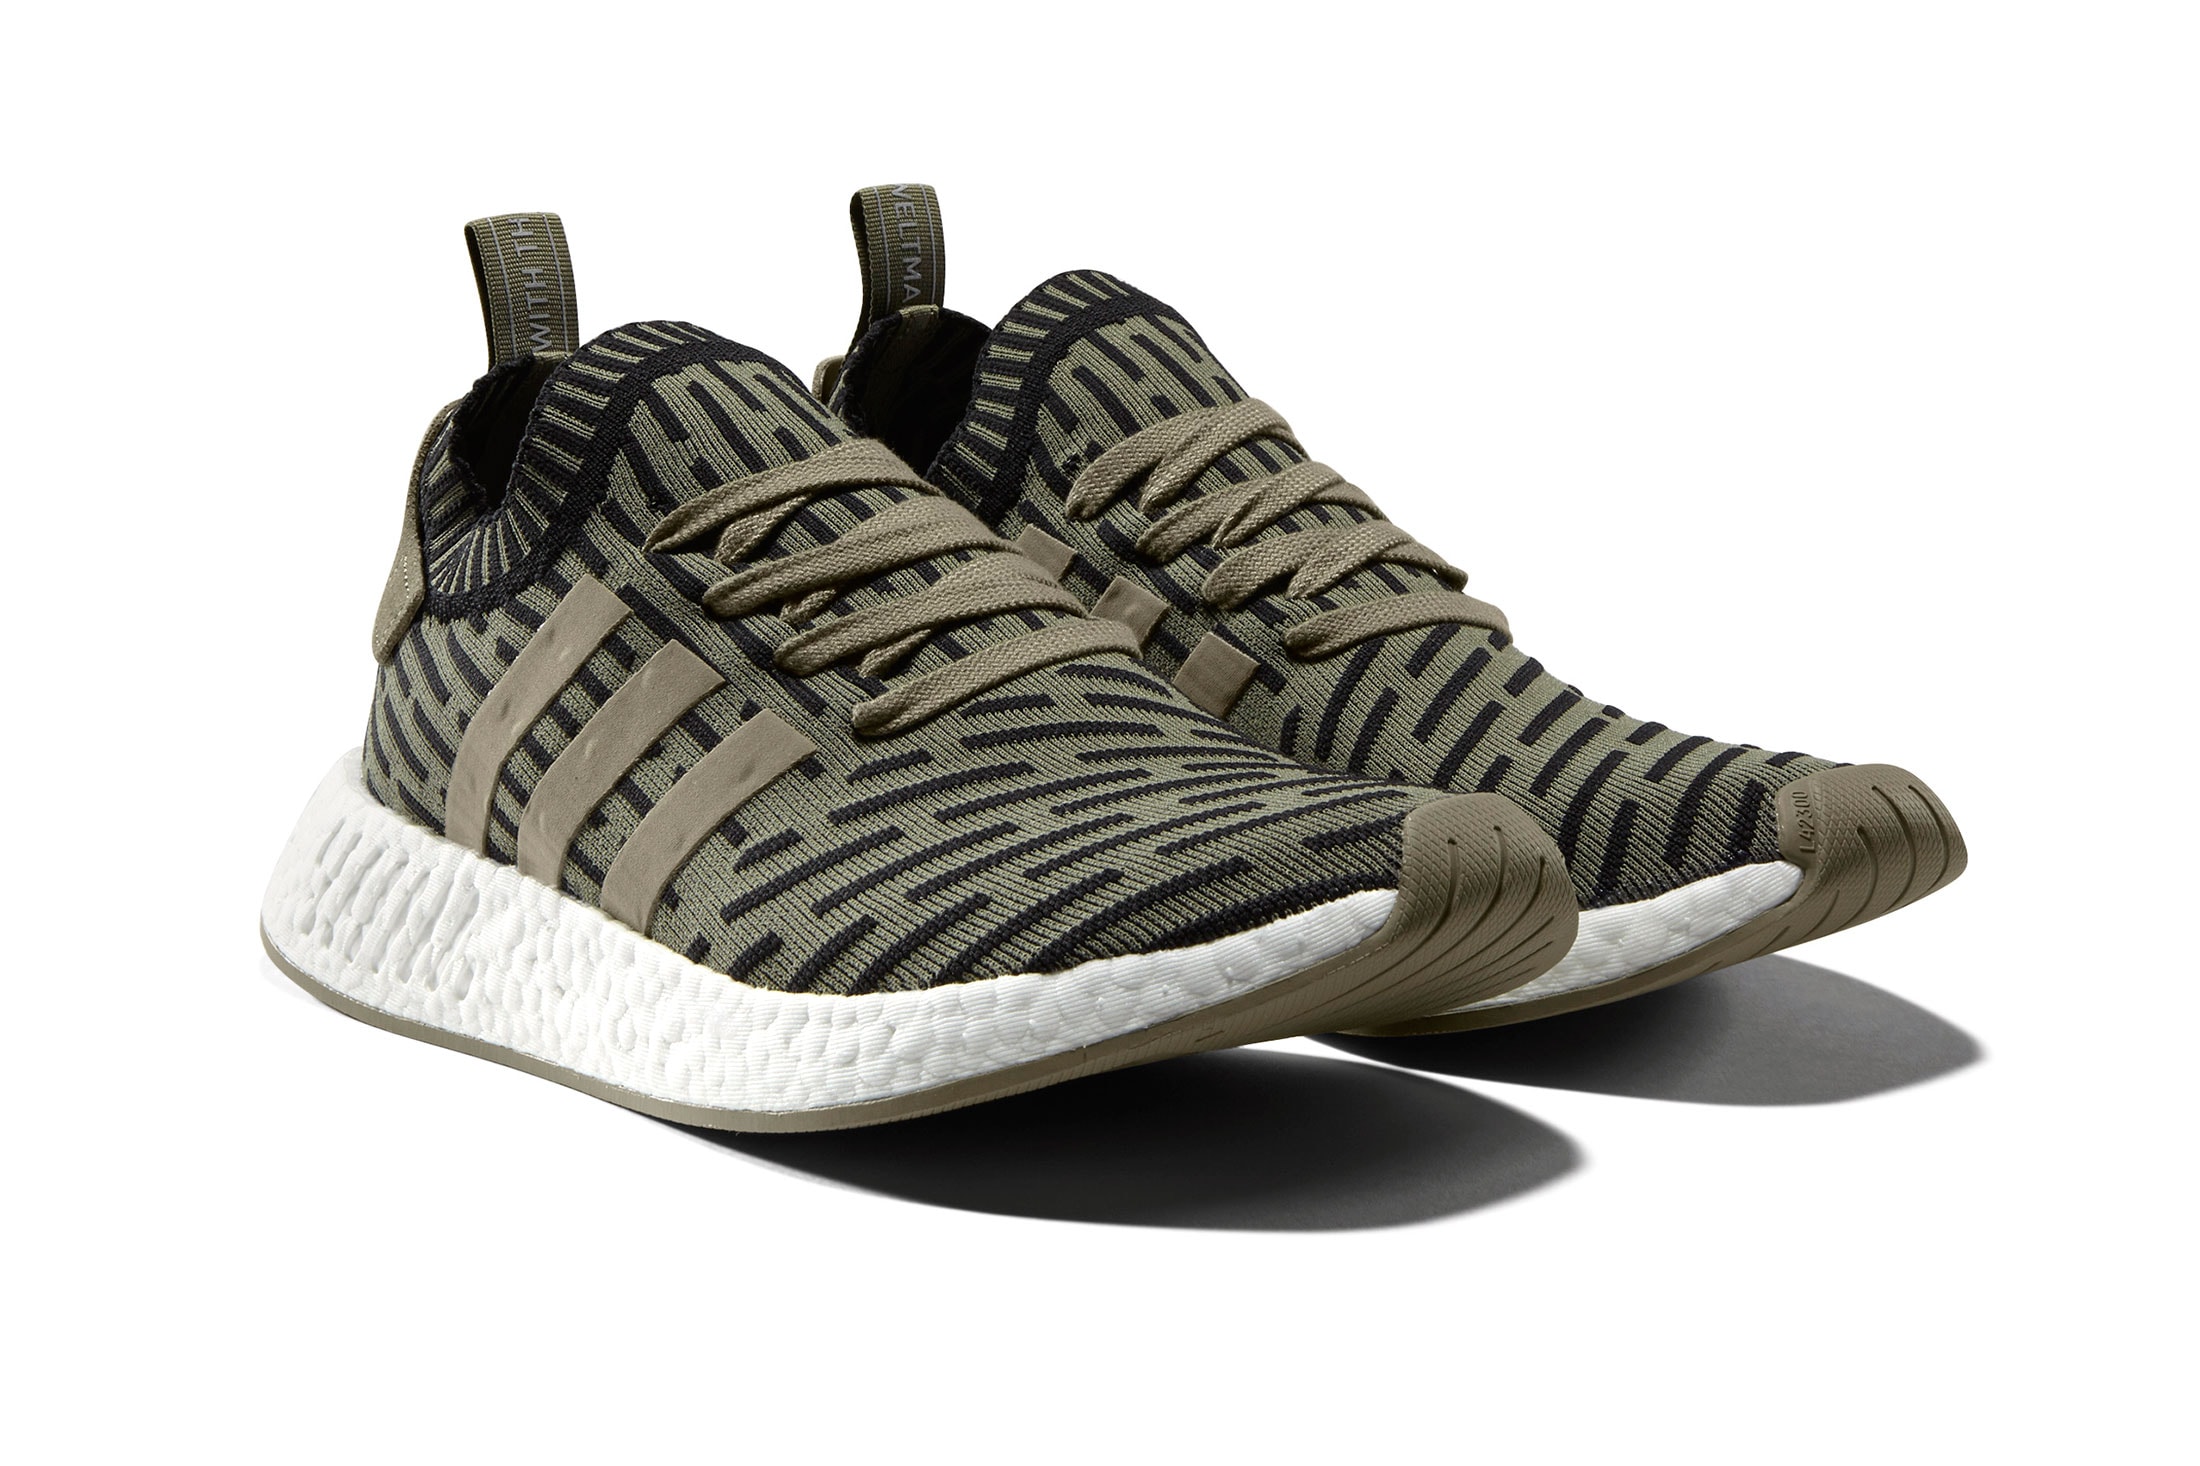 adidas Originals NMD_R2 Olive green white boost sole